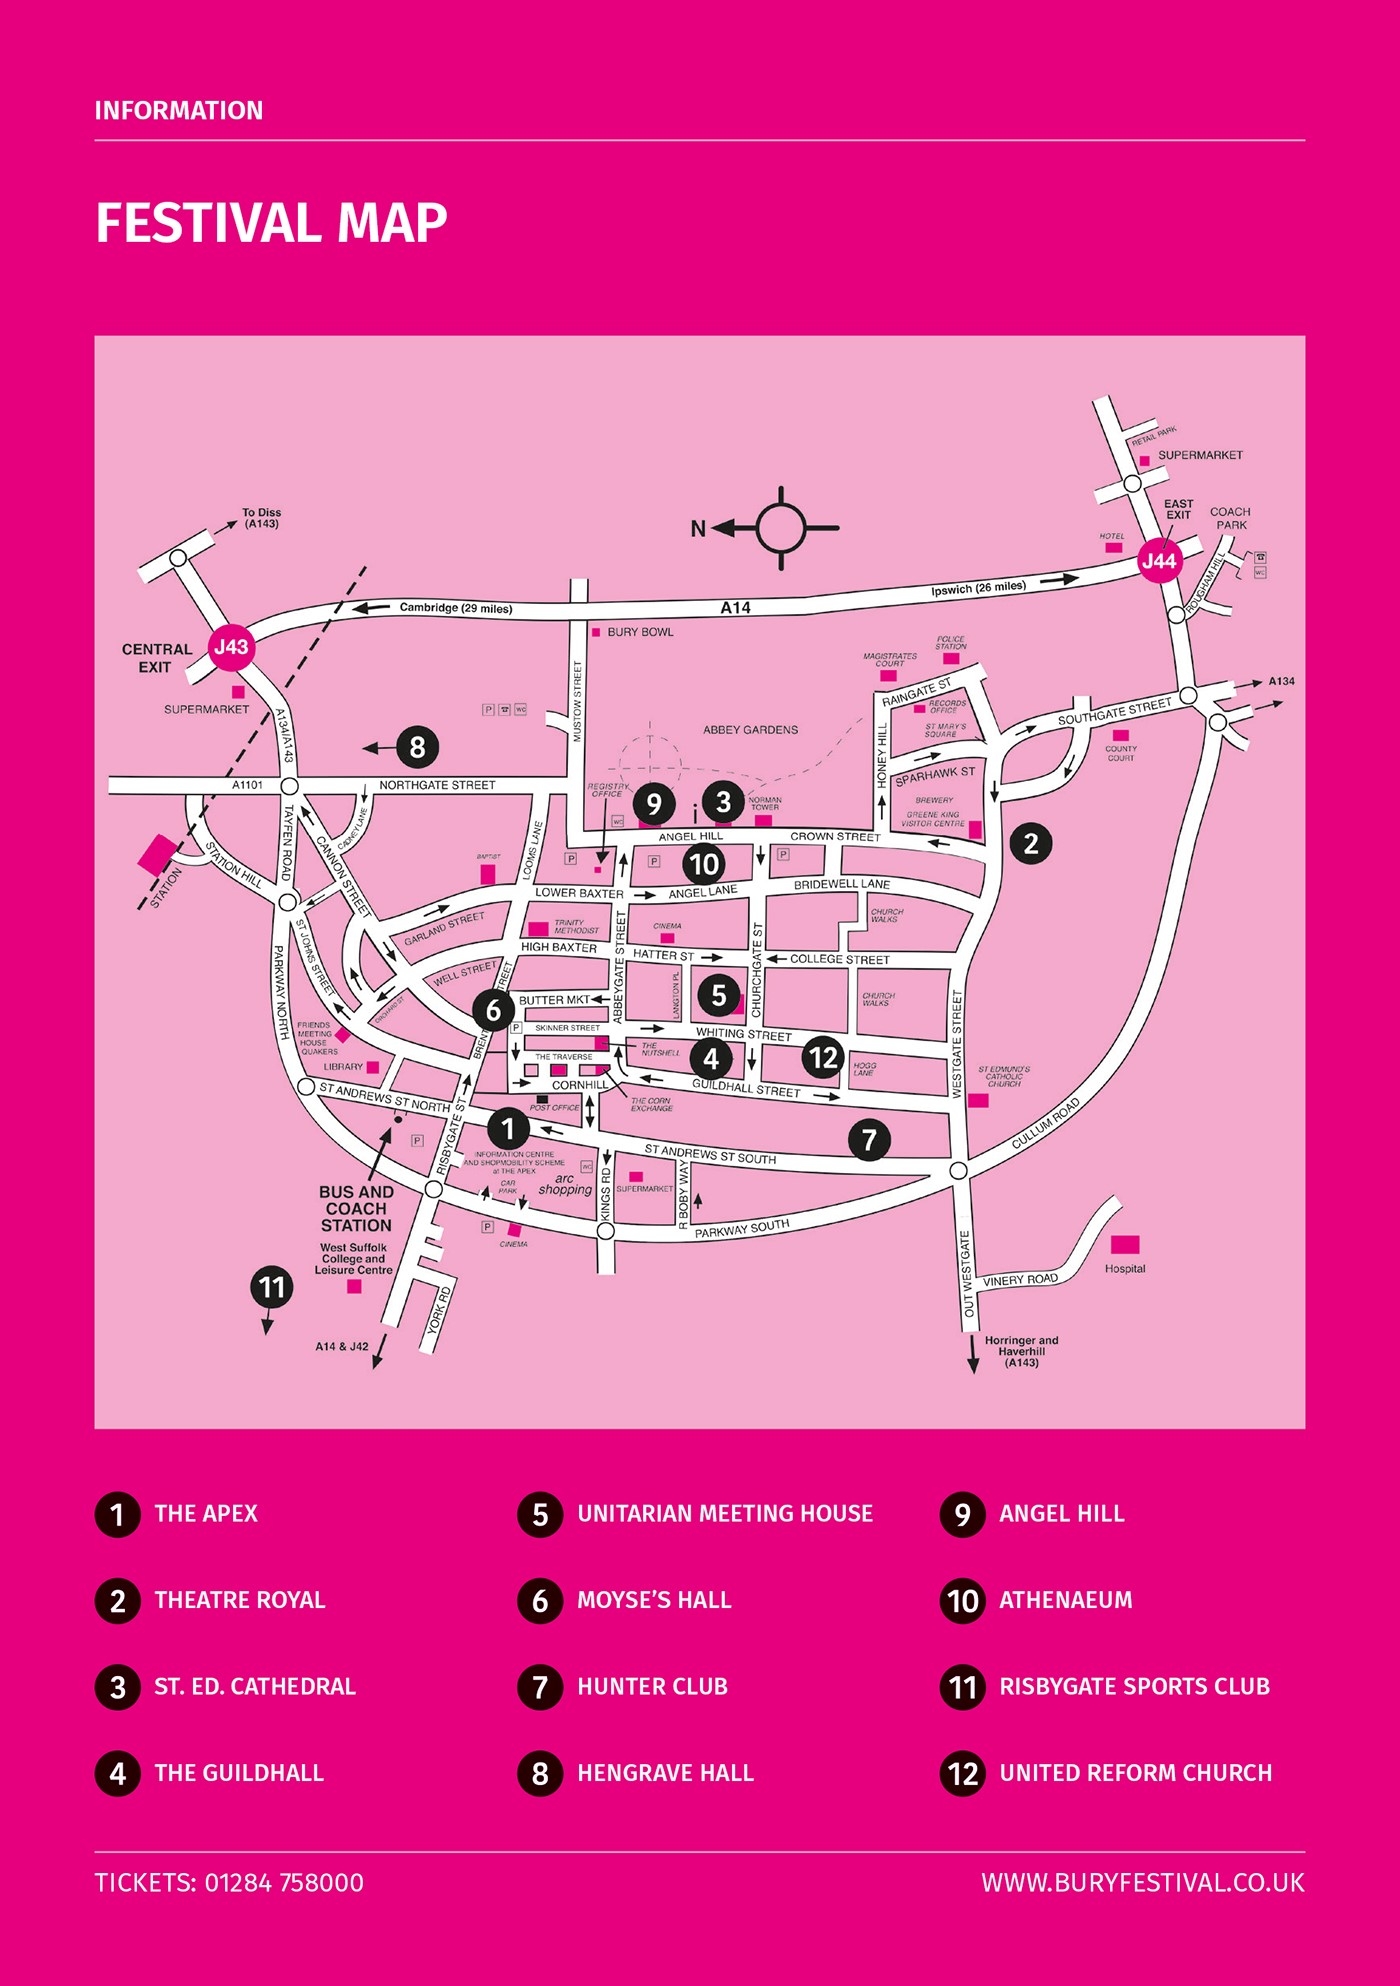 festival map 2020. For full information on venue details and events, visit our Festival venues page.